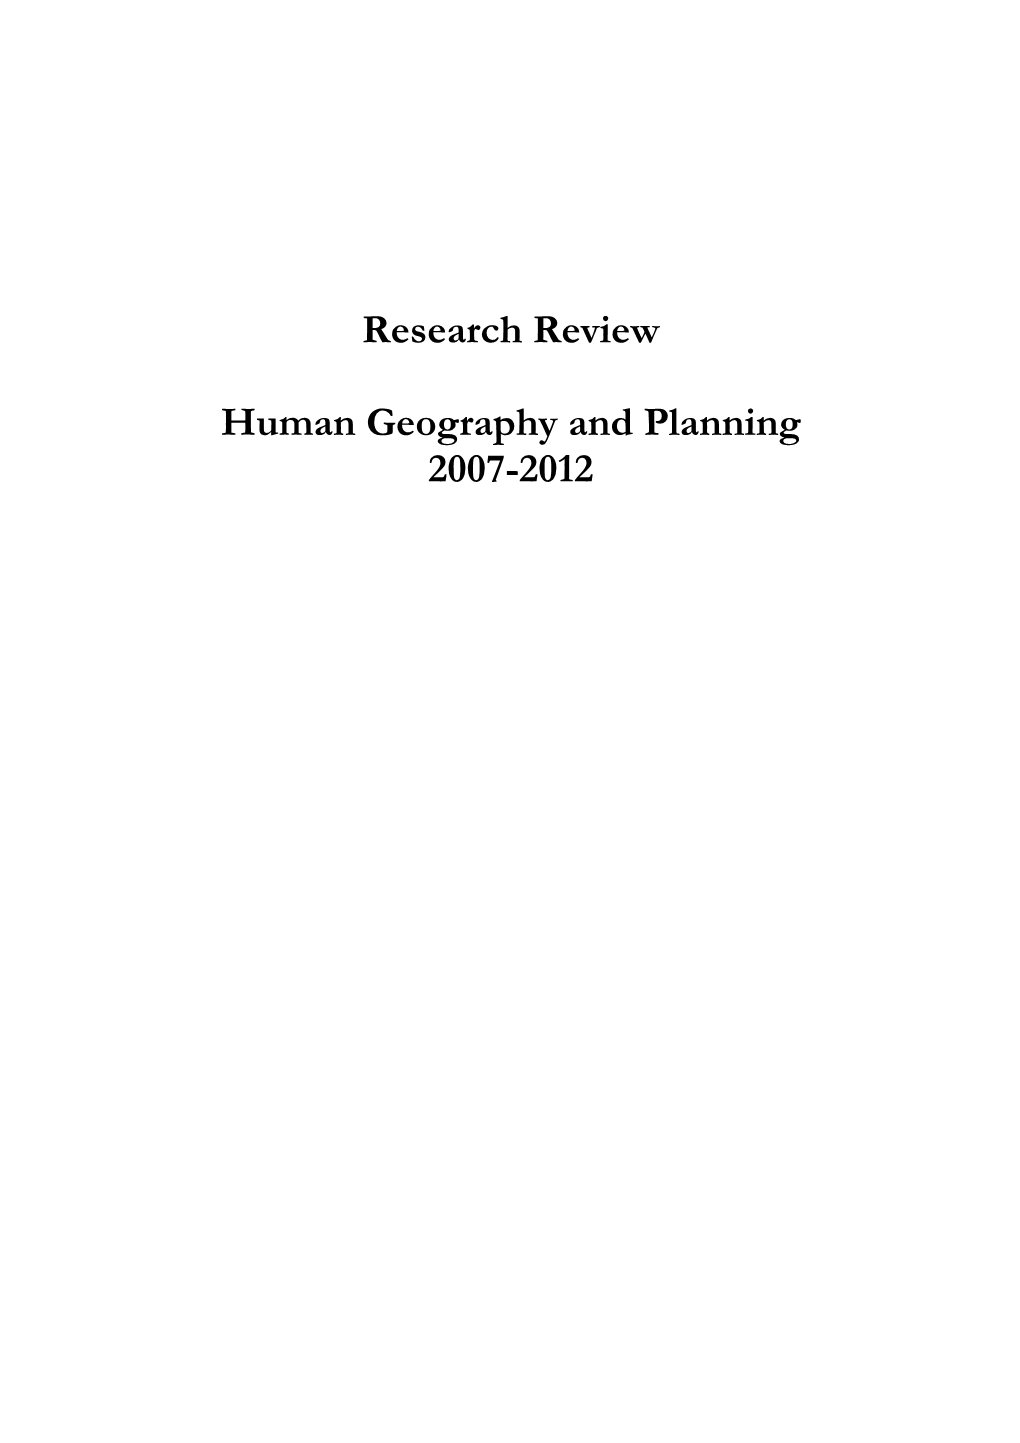 Research Review Human Geography And